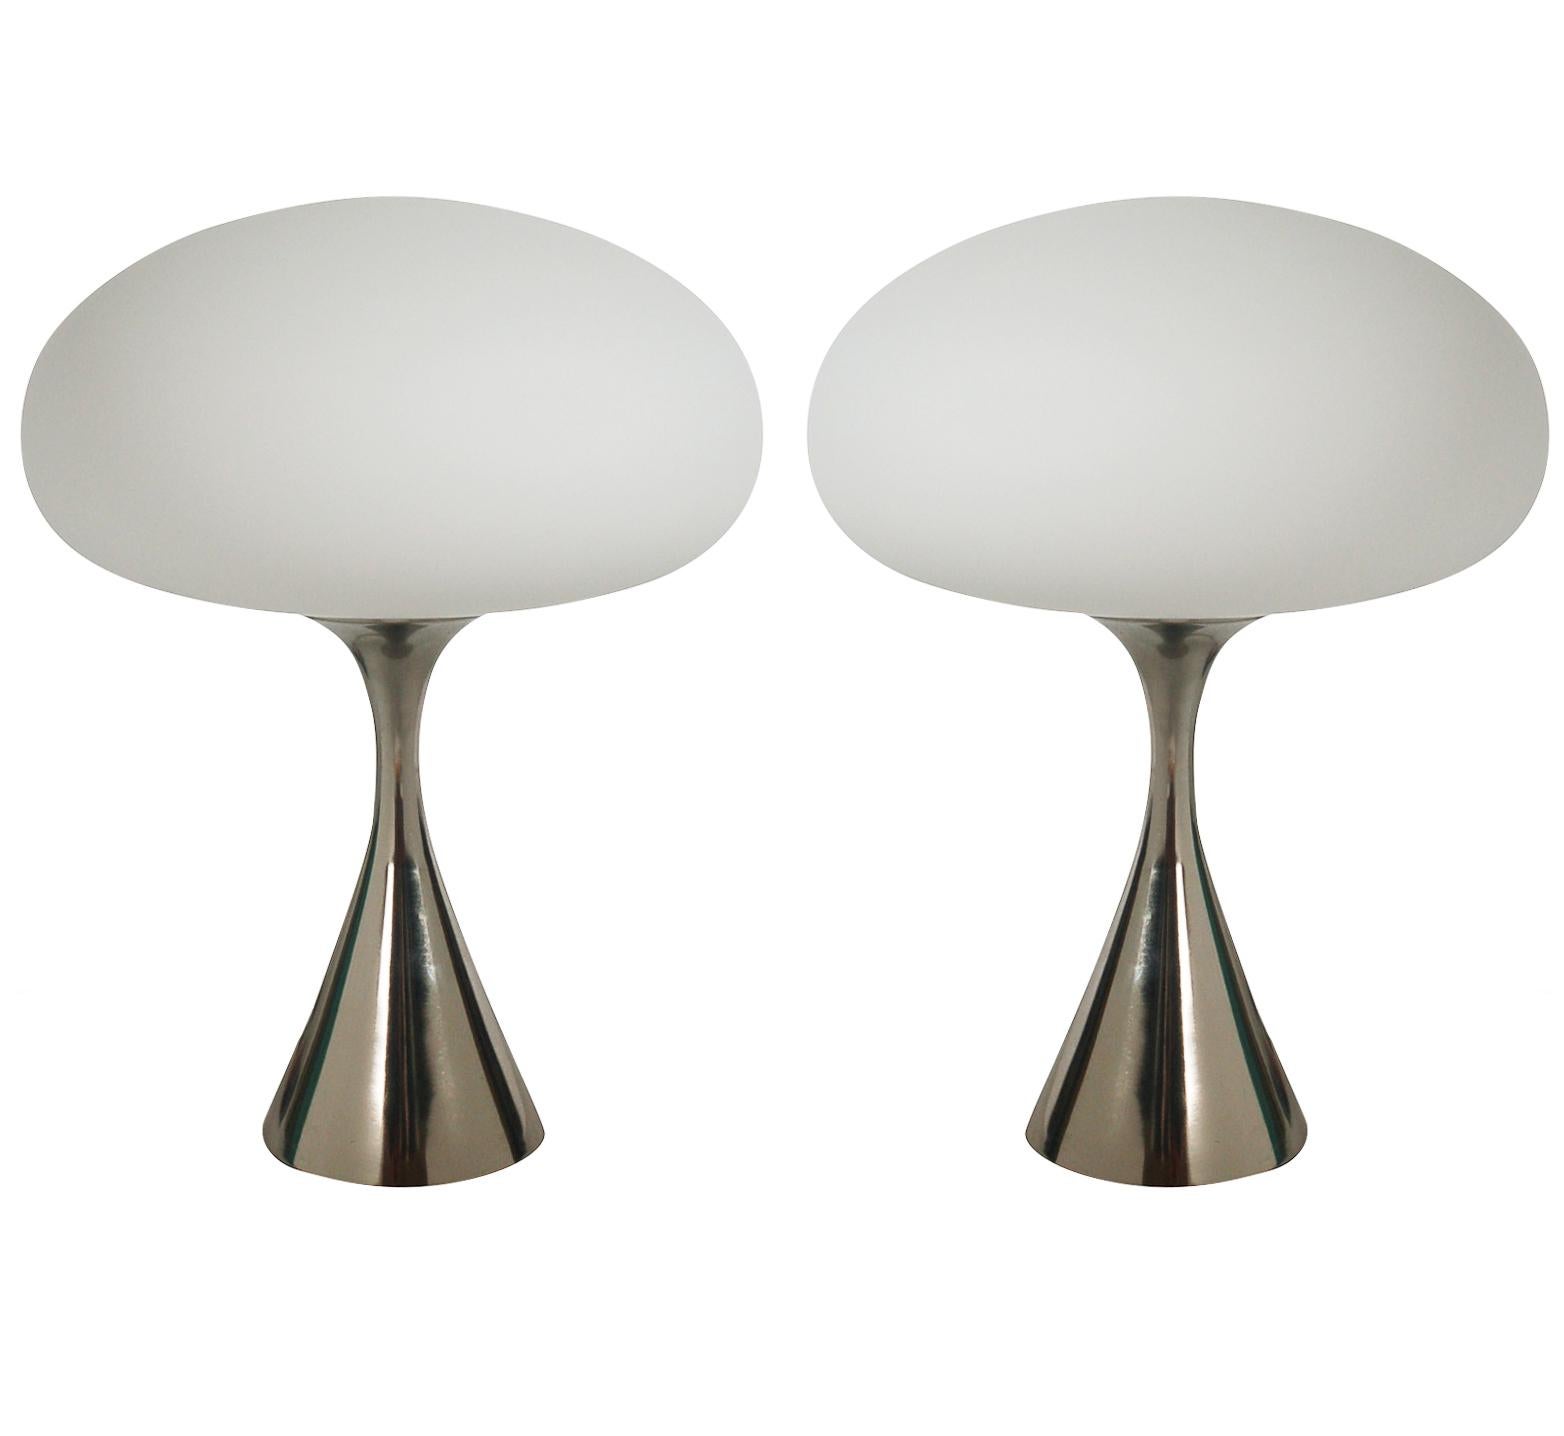 Contemporary Pair of Mid-Century Modern Table Lamps by Designline in Chrome & White Glass For Sale